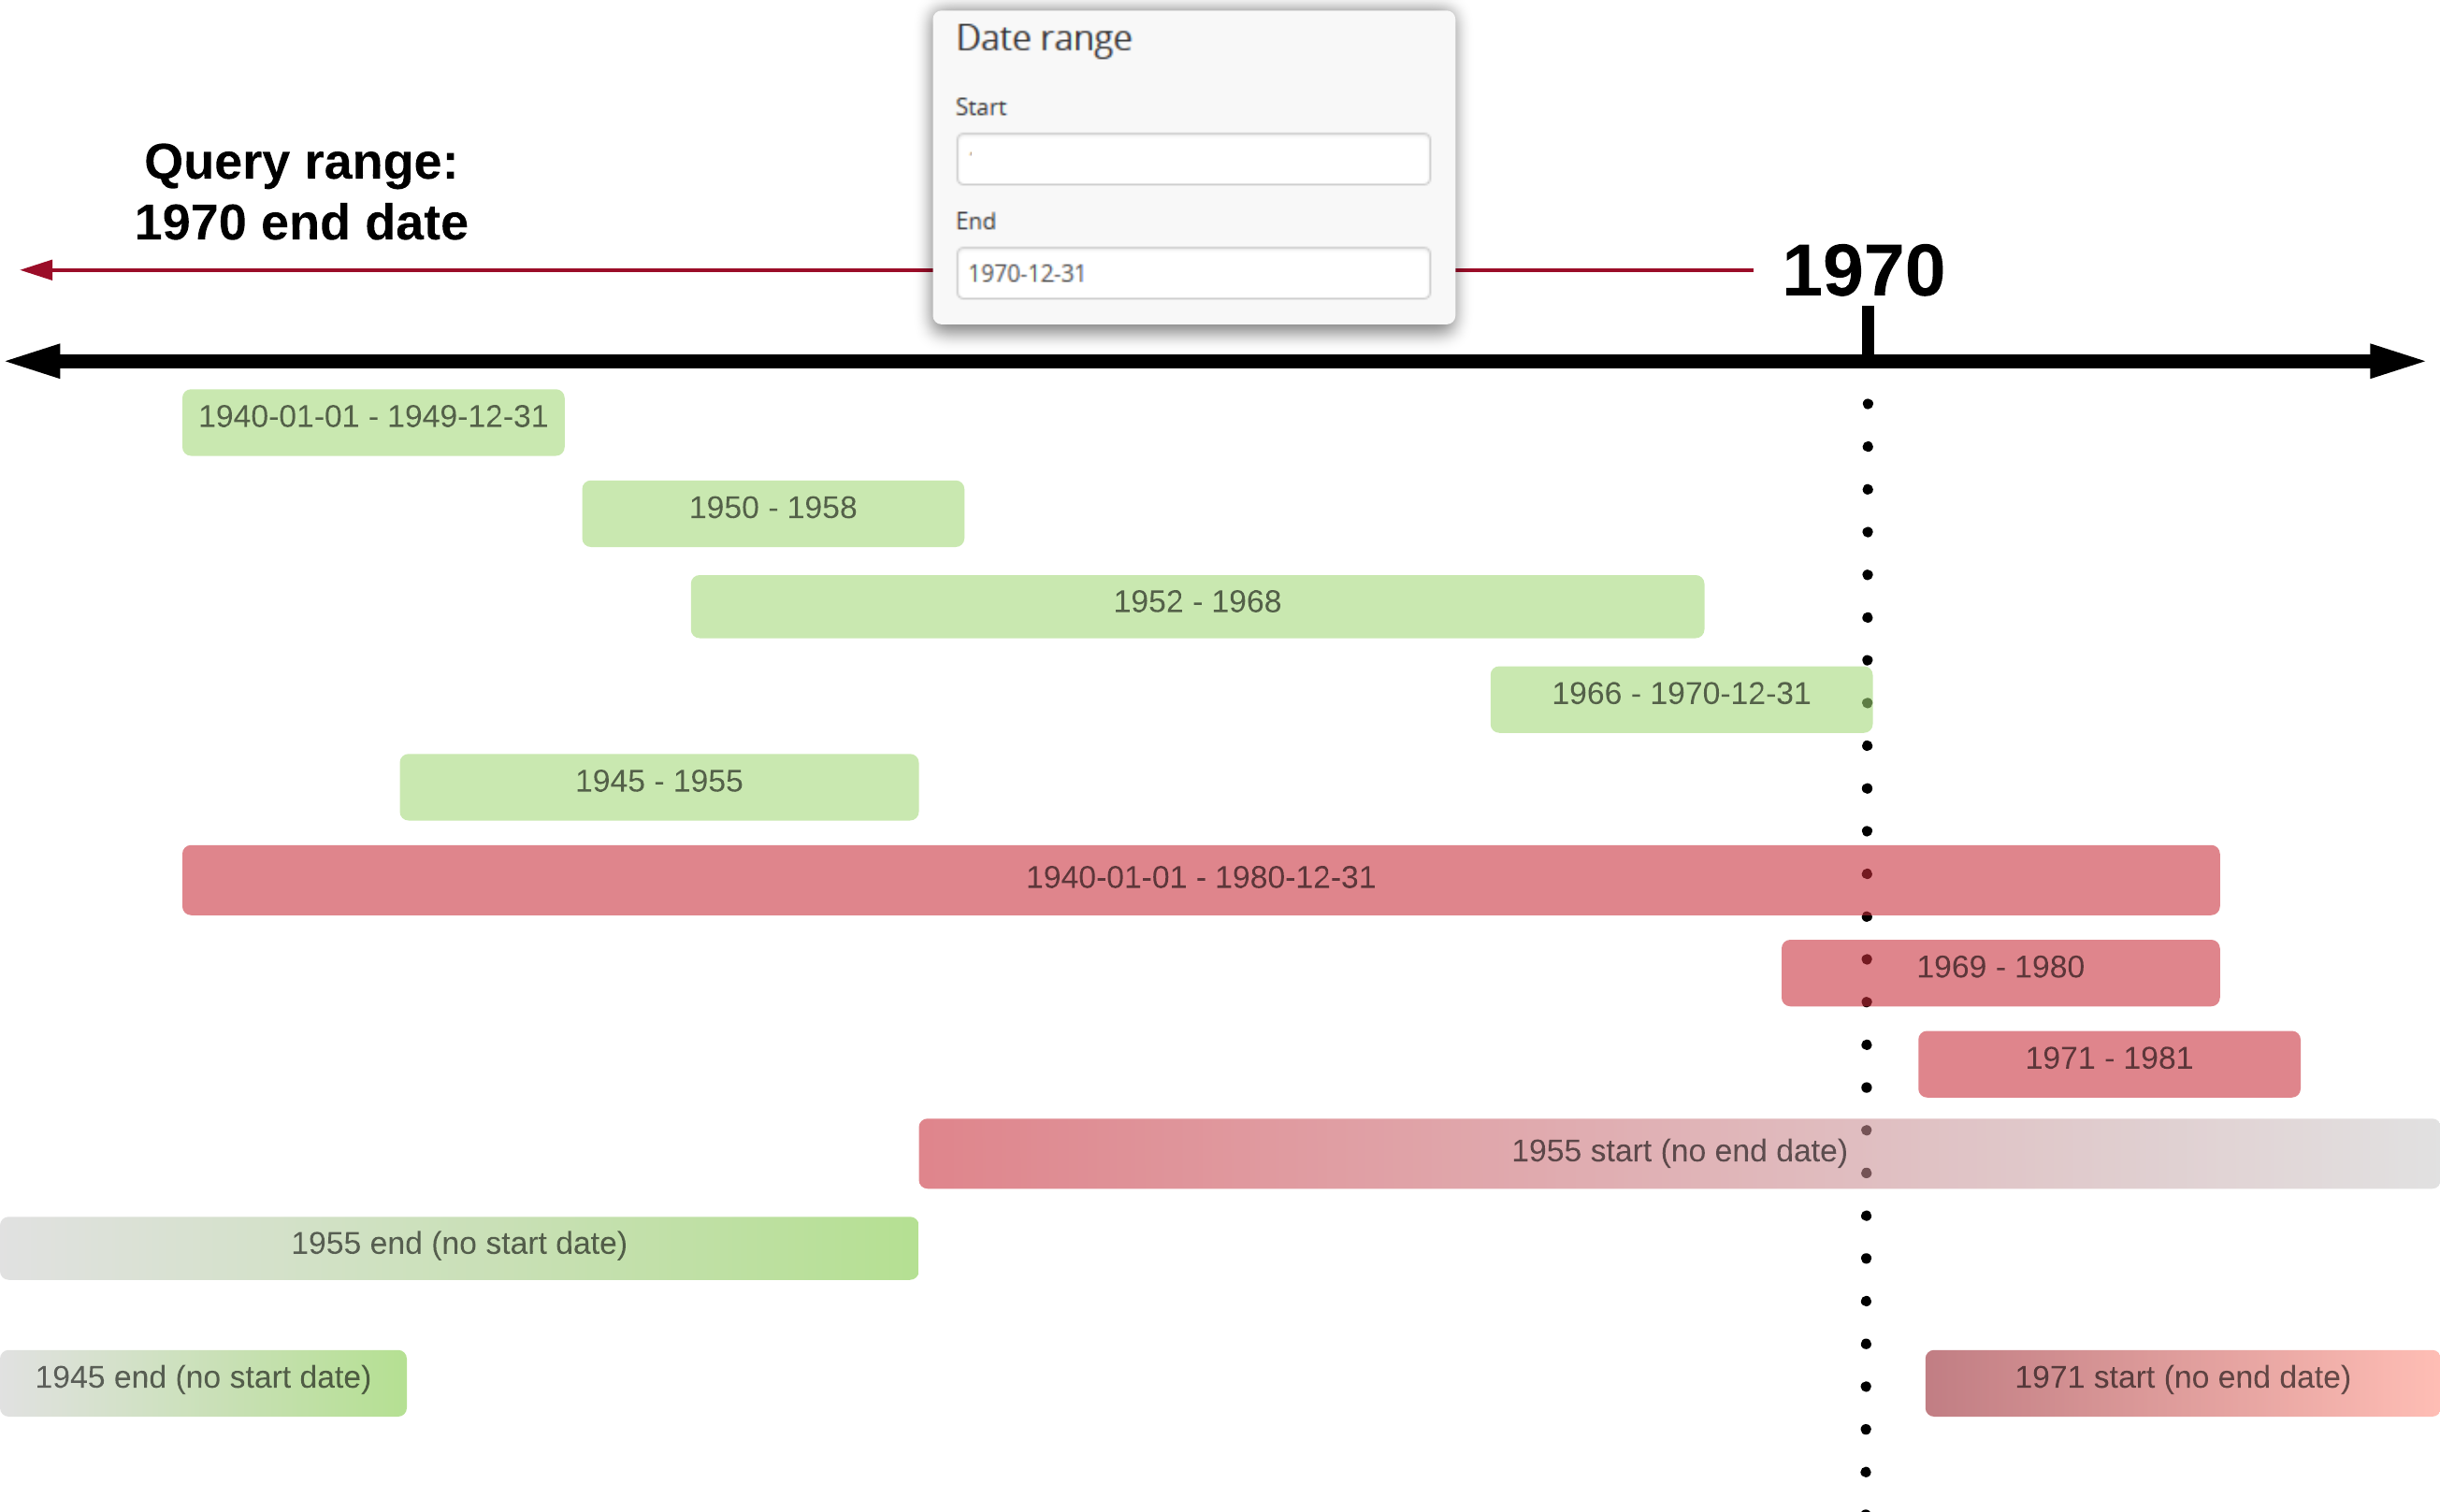 An example of results returned for a 1970 end date query with the Exact option used